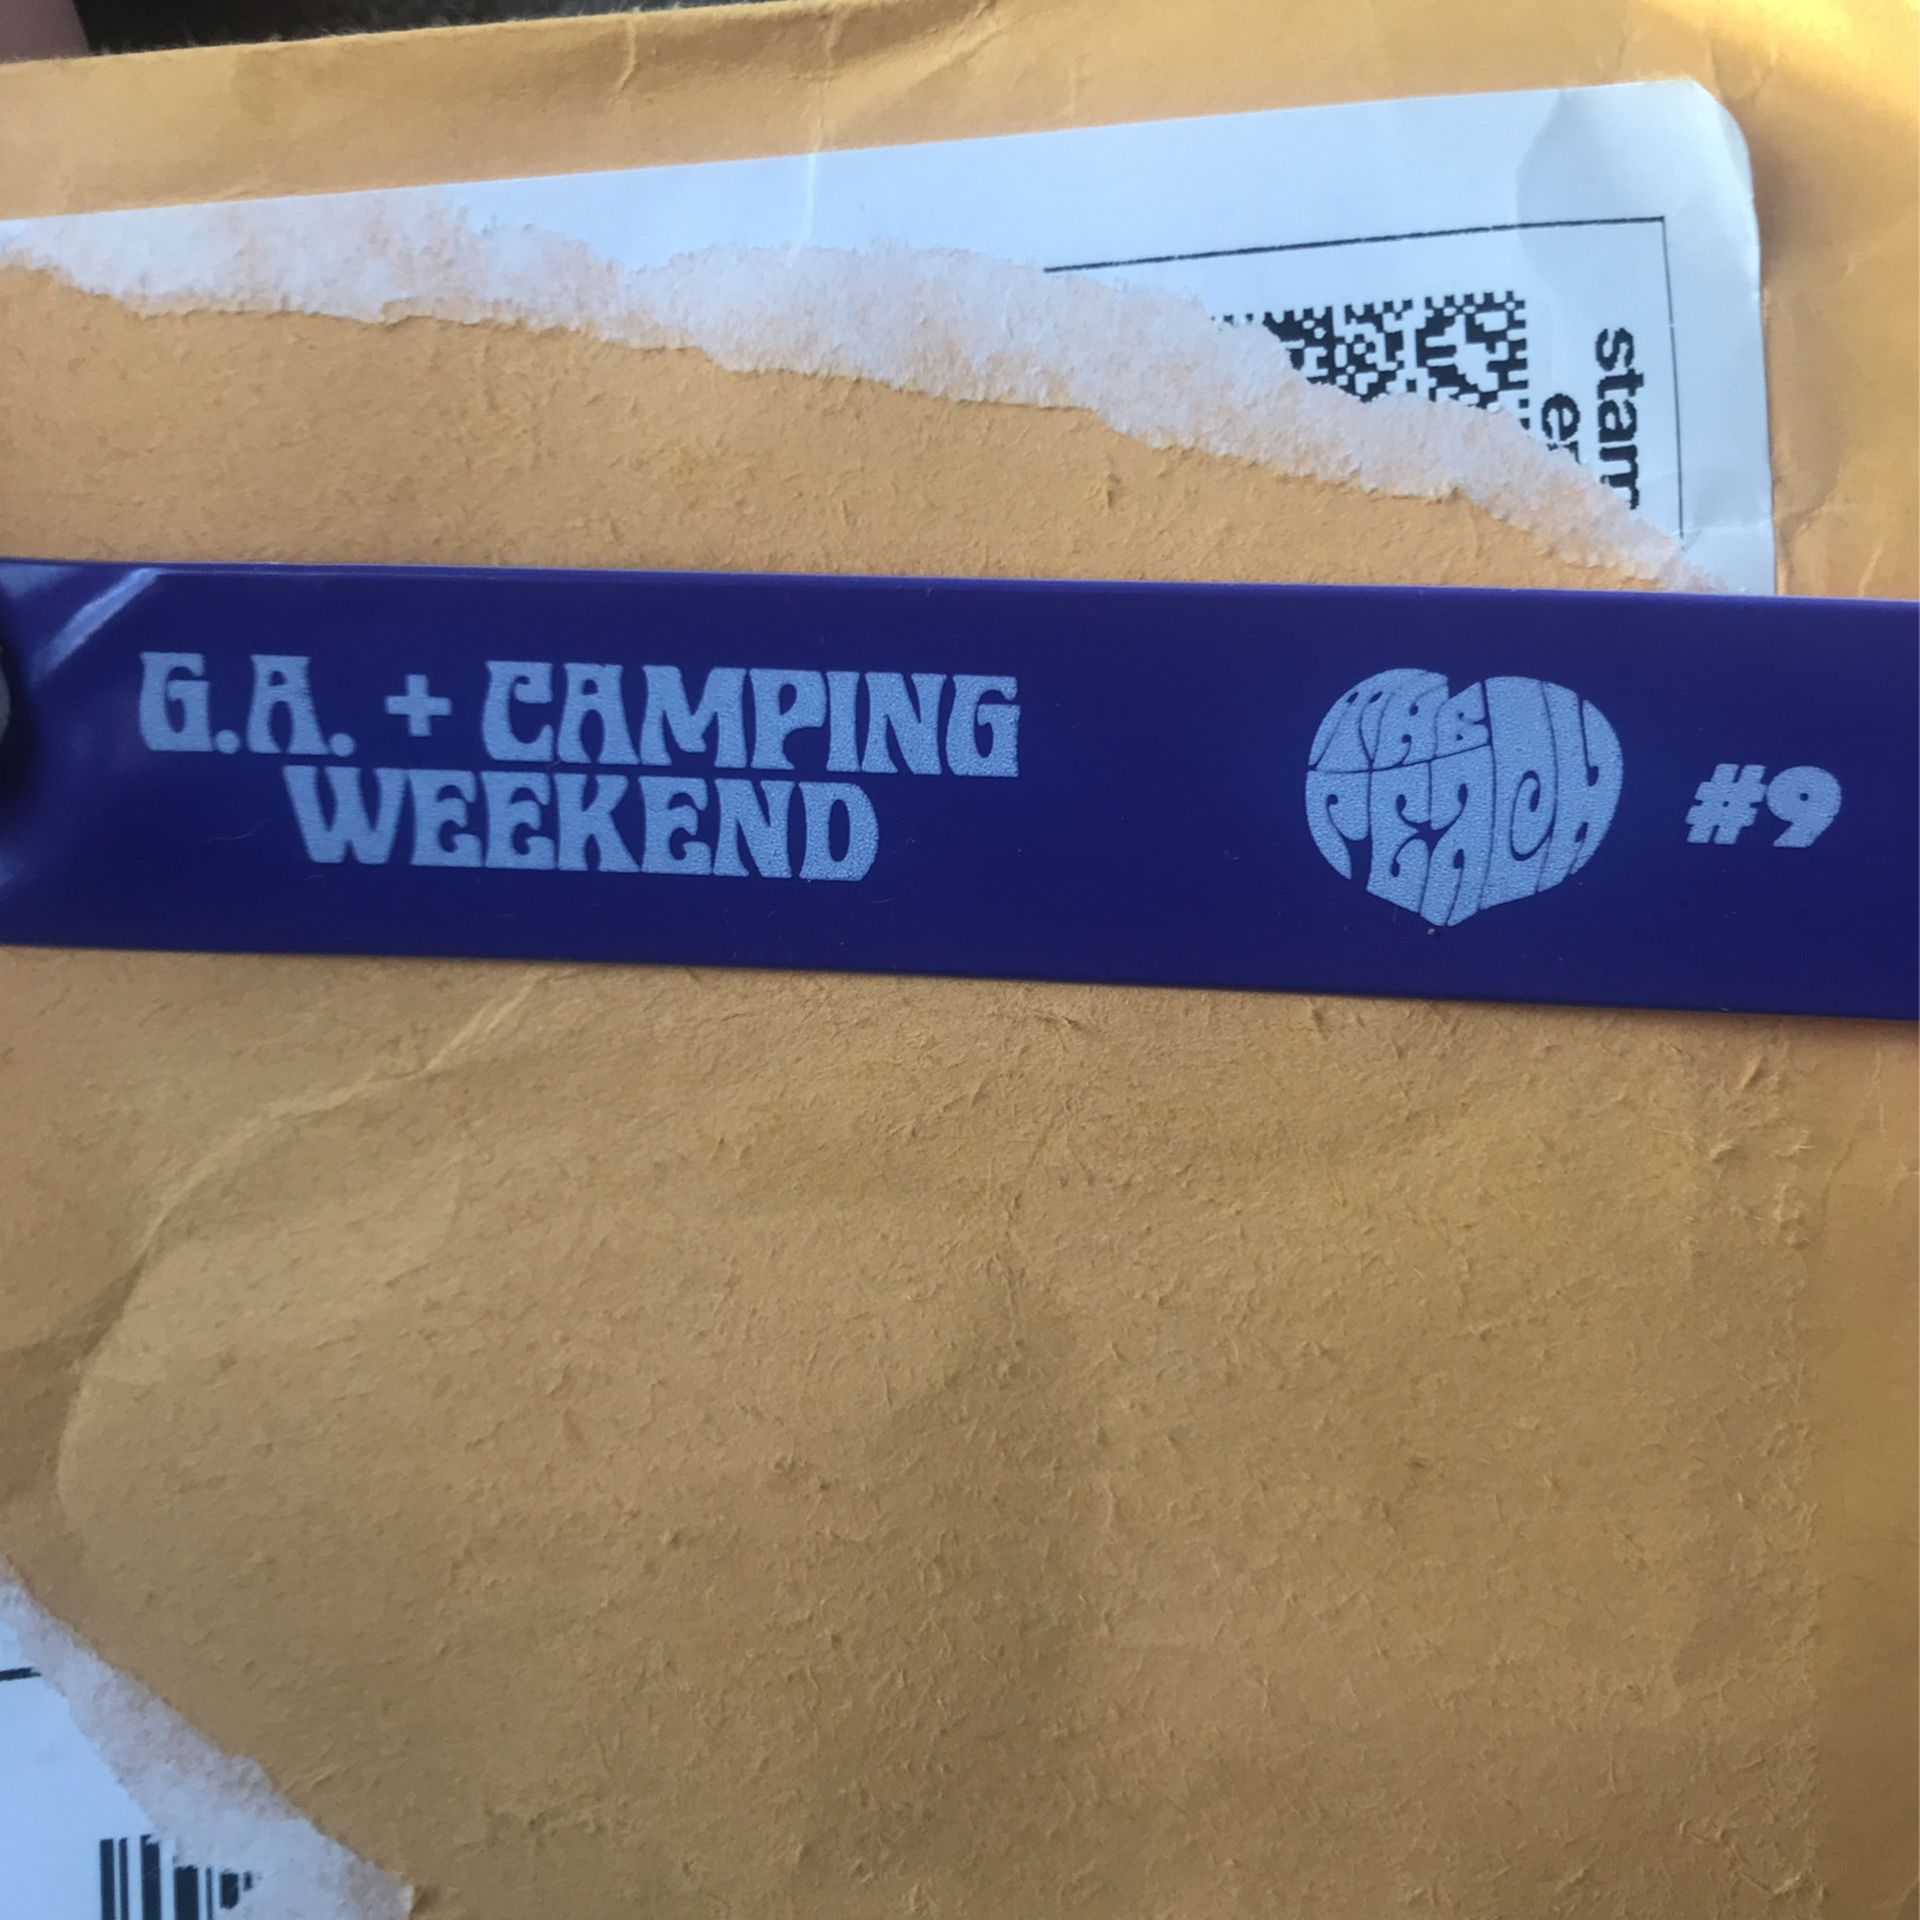 1 4 Day GA Pass Plus Camping Ticket To The Peach Festivall